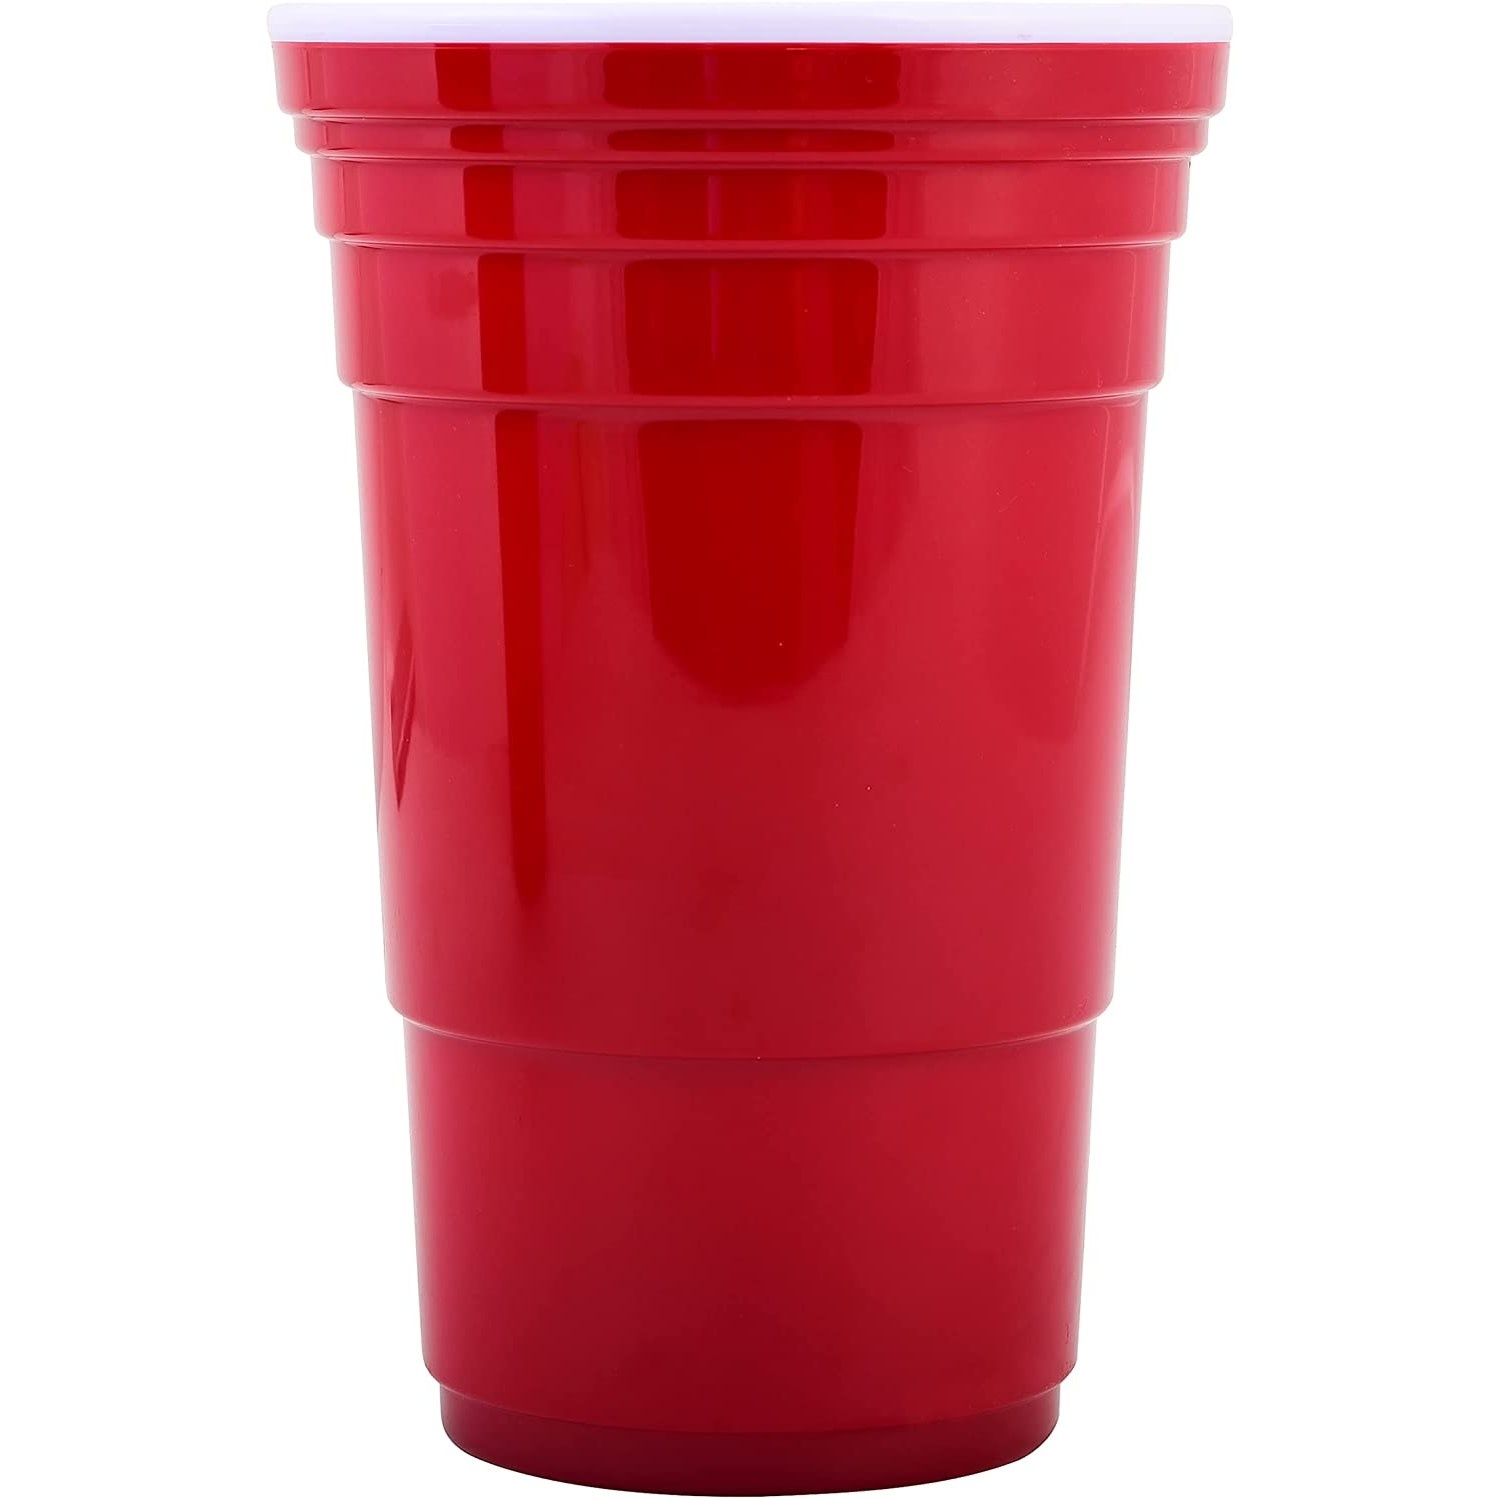 Red Cup Living Red Cup Living Reusable "Solo-style"  Beverage Cup, 32-Ounce, BPA Free